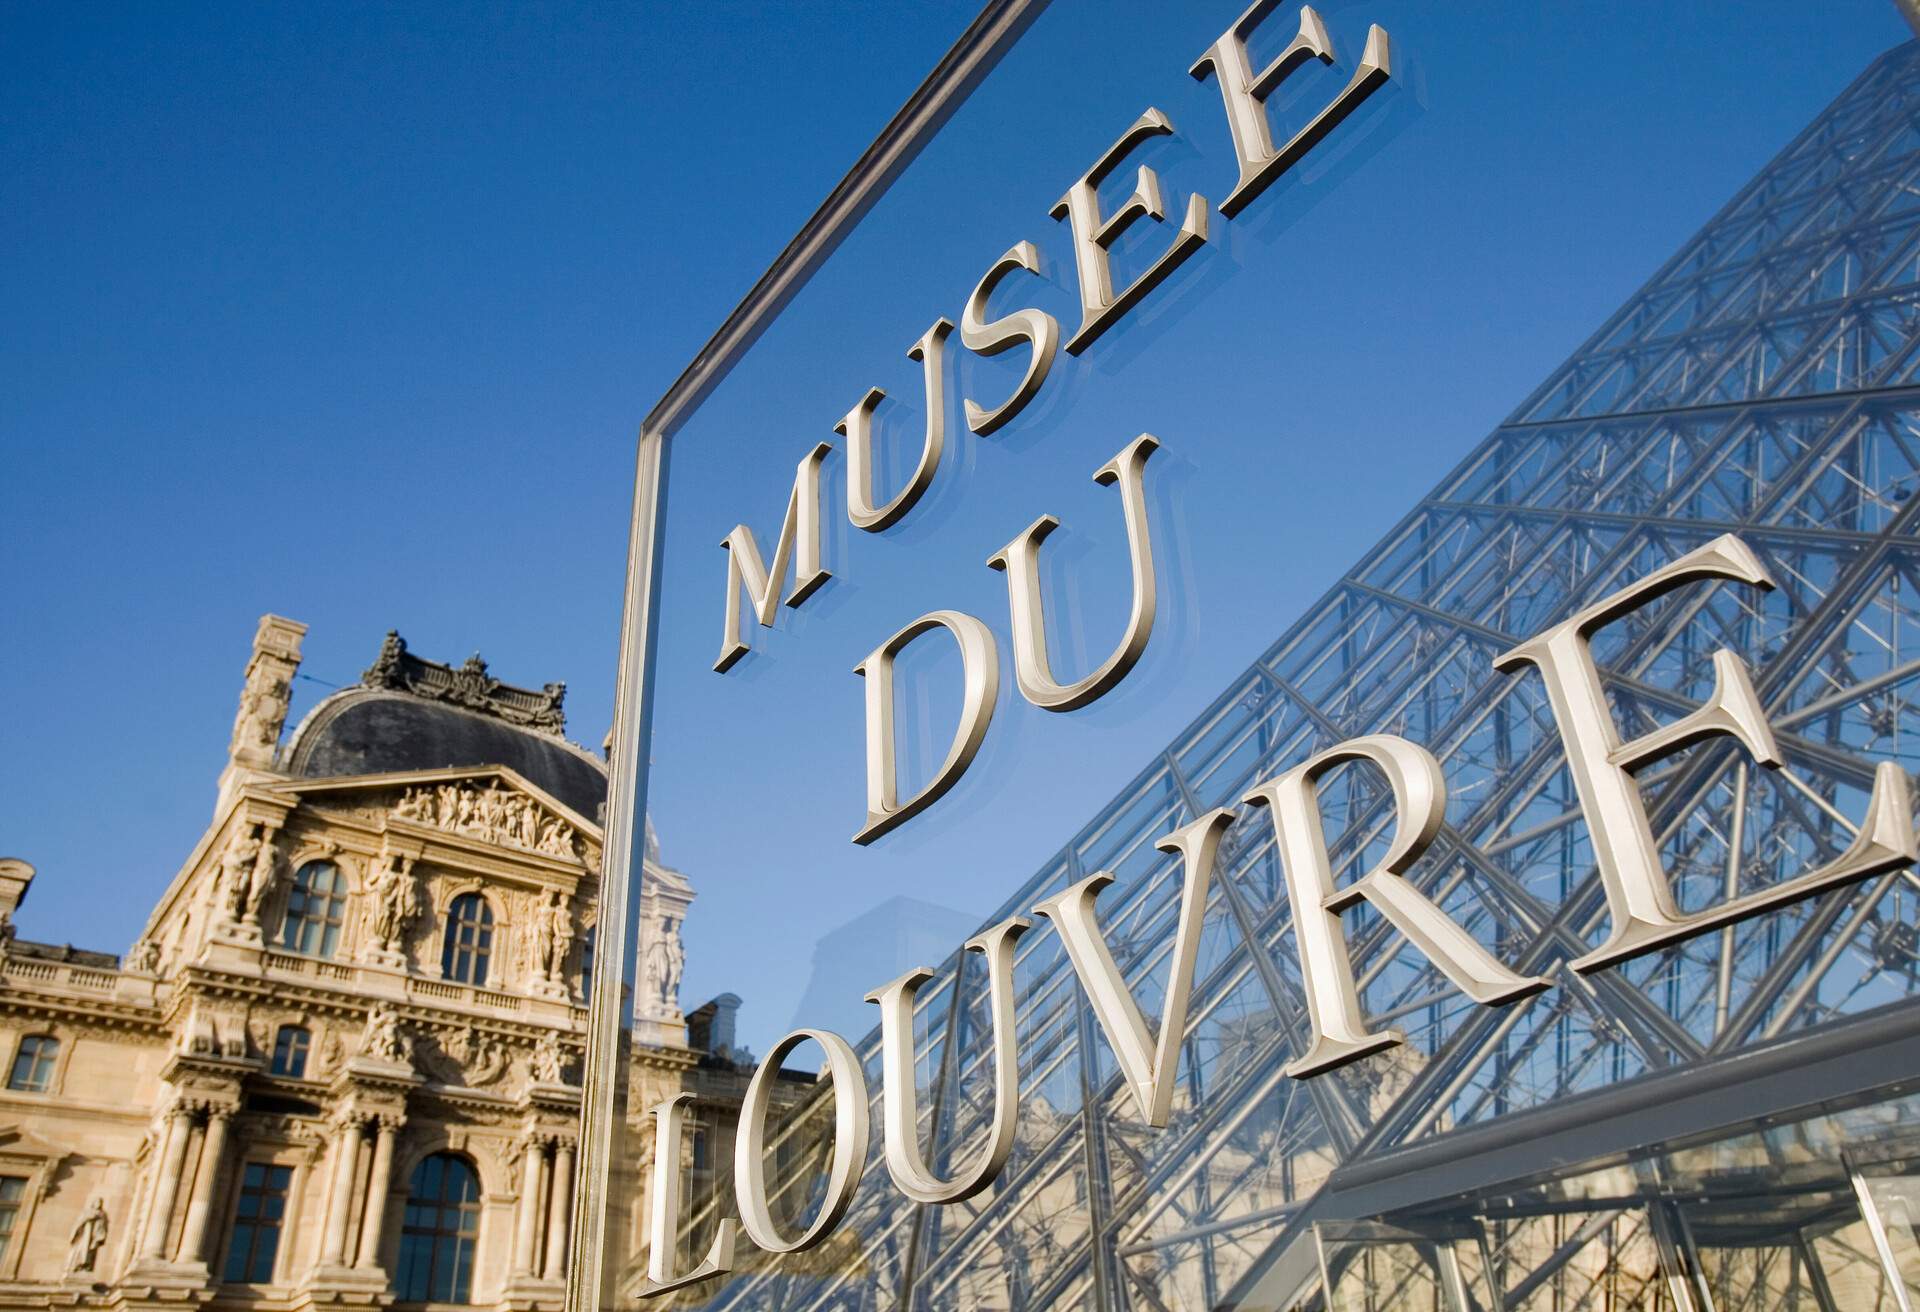 The upper portion of the Louvre palace, including a portion of the Louvre Pyramid and a "Musee du Louvre" sign.